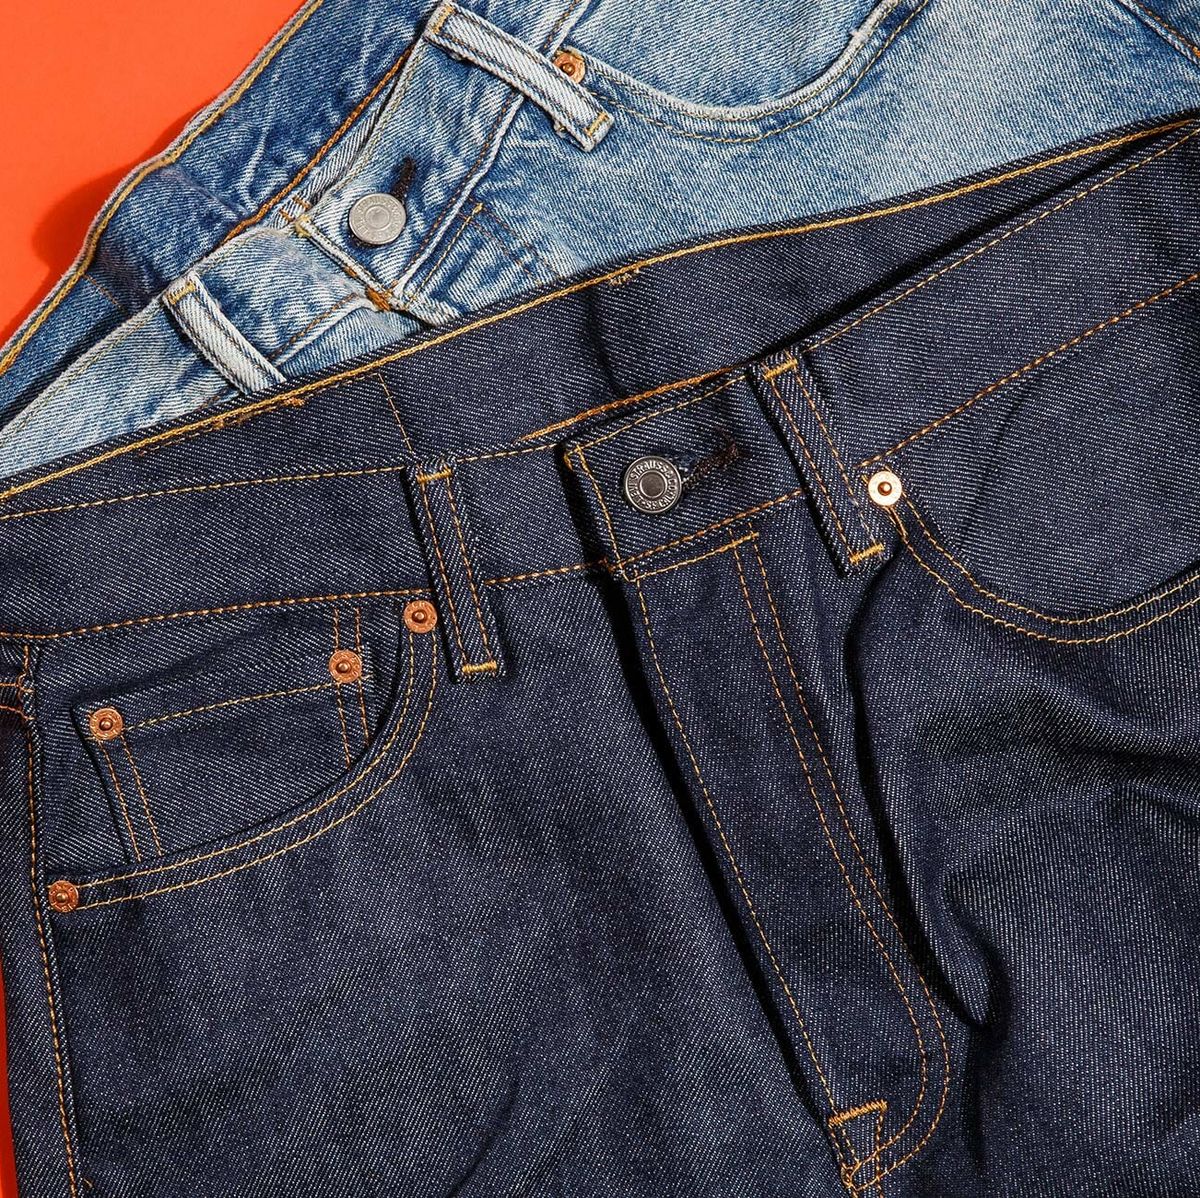 Levi's Review: Is the Blue Jean Any Good?